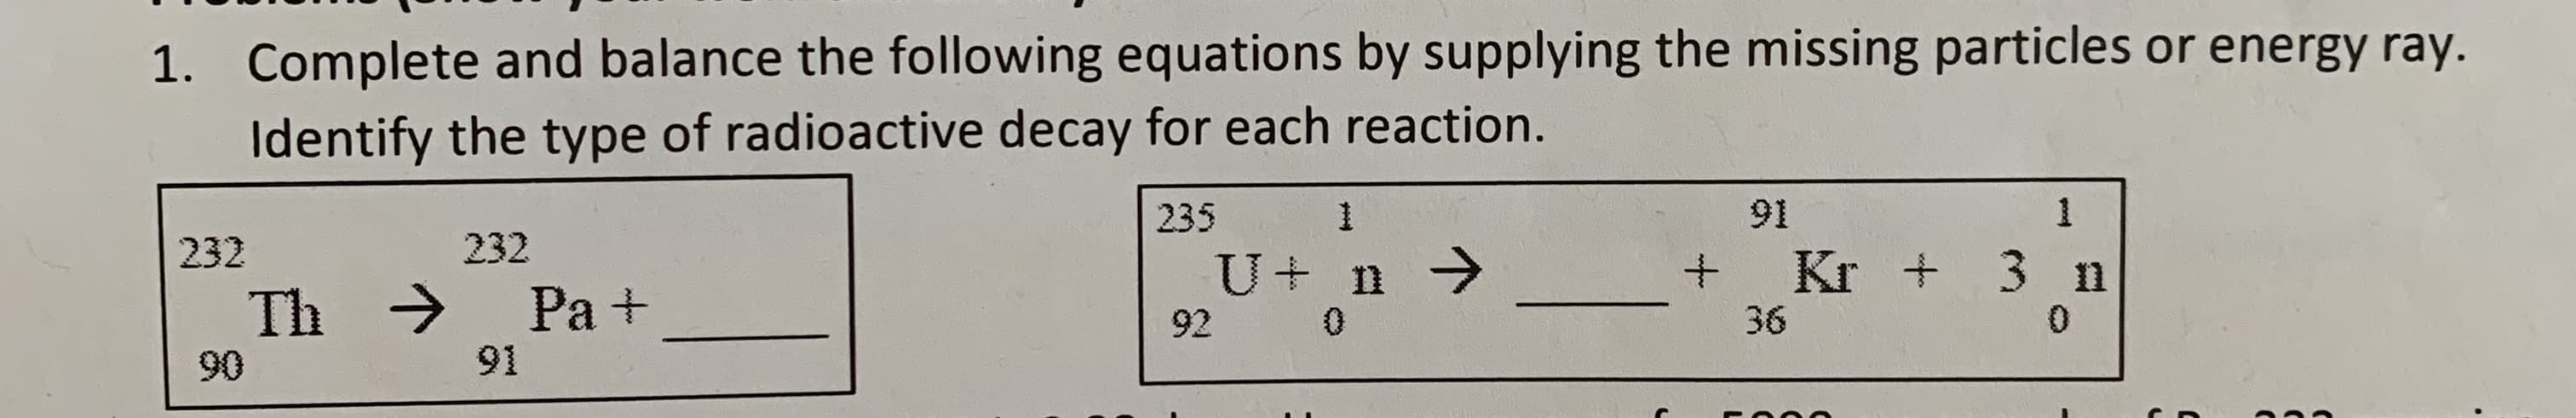 Complete and balance the following equations by supplying the missing particles or energy ray.
Identify the type of radioactive decay for each reaction.
1.
1
91
235
232
232
Kr +3 I
U+ n7
+
Pa+
Th
0
36
0
92
91
90
